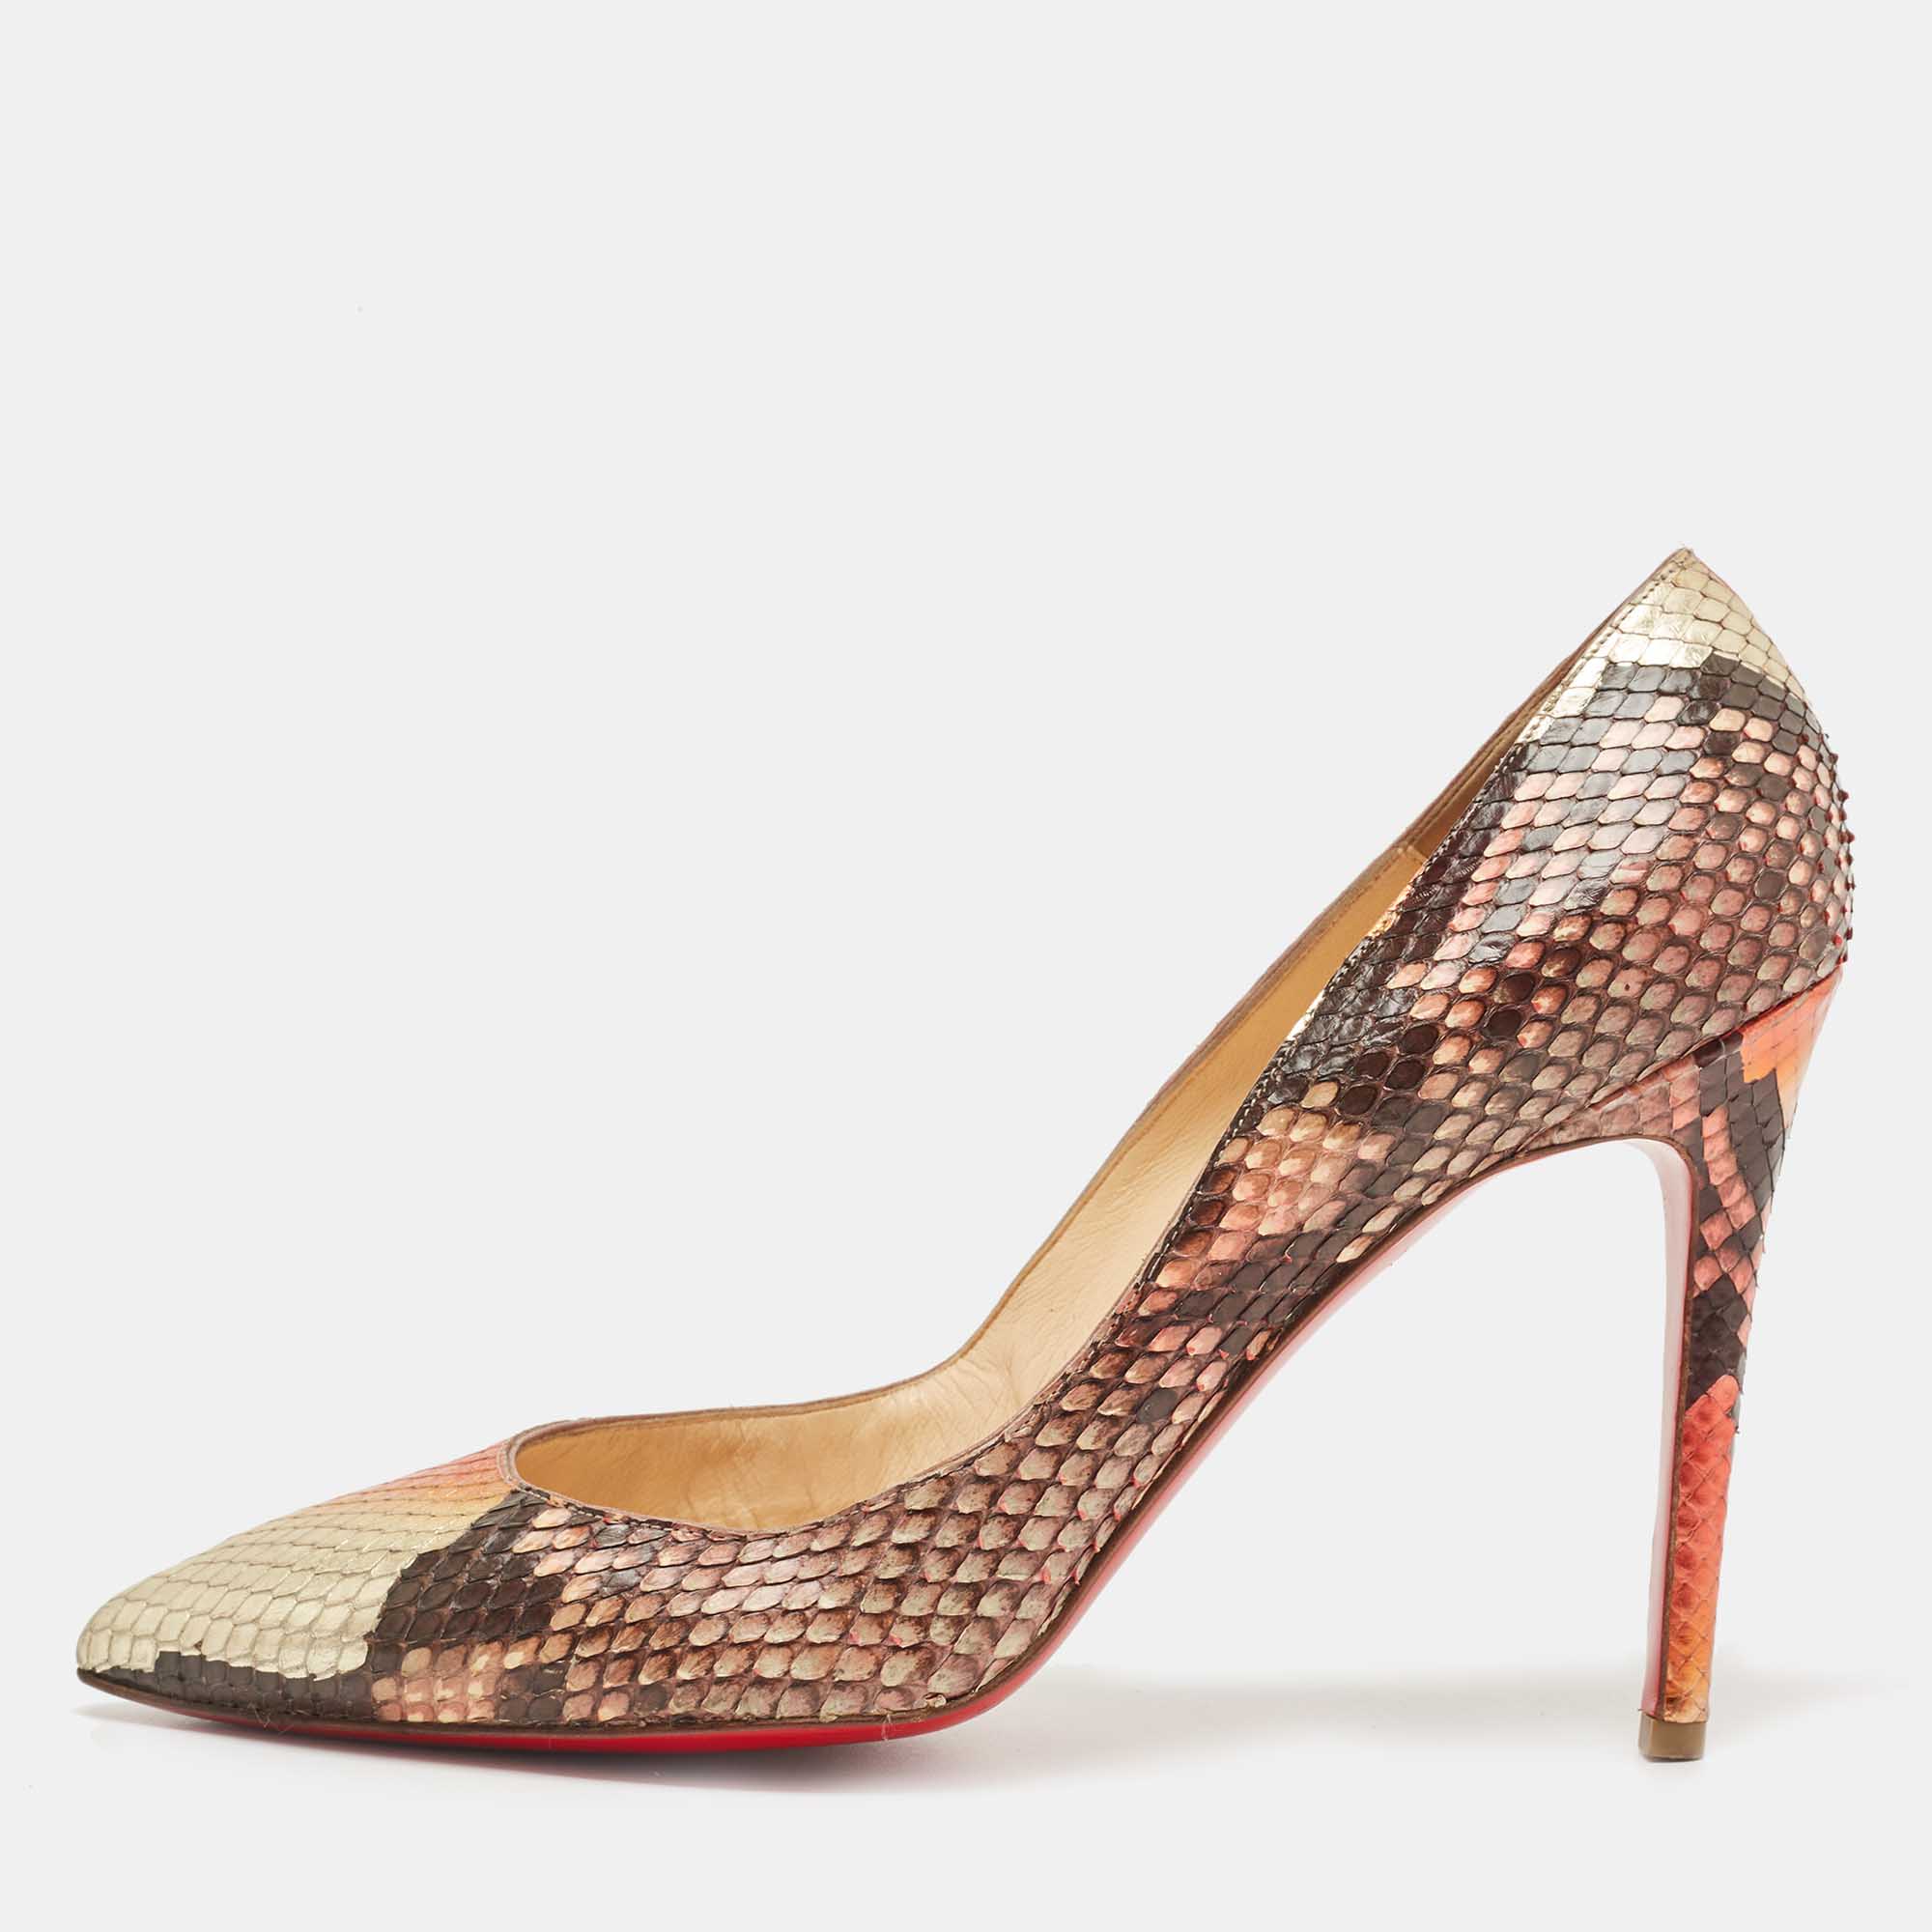 Pre-owned Christian Louboutin Multicolor Python Leather So Kate Pointed Toe Pumps Size 40.5